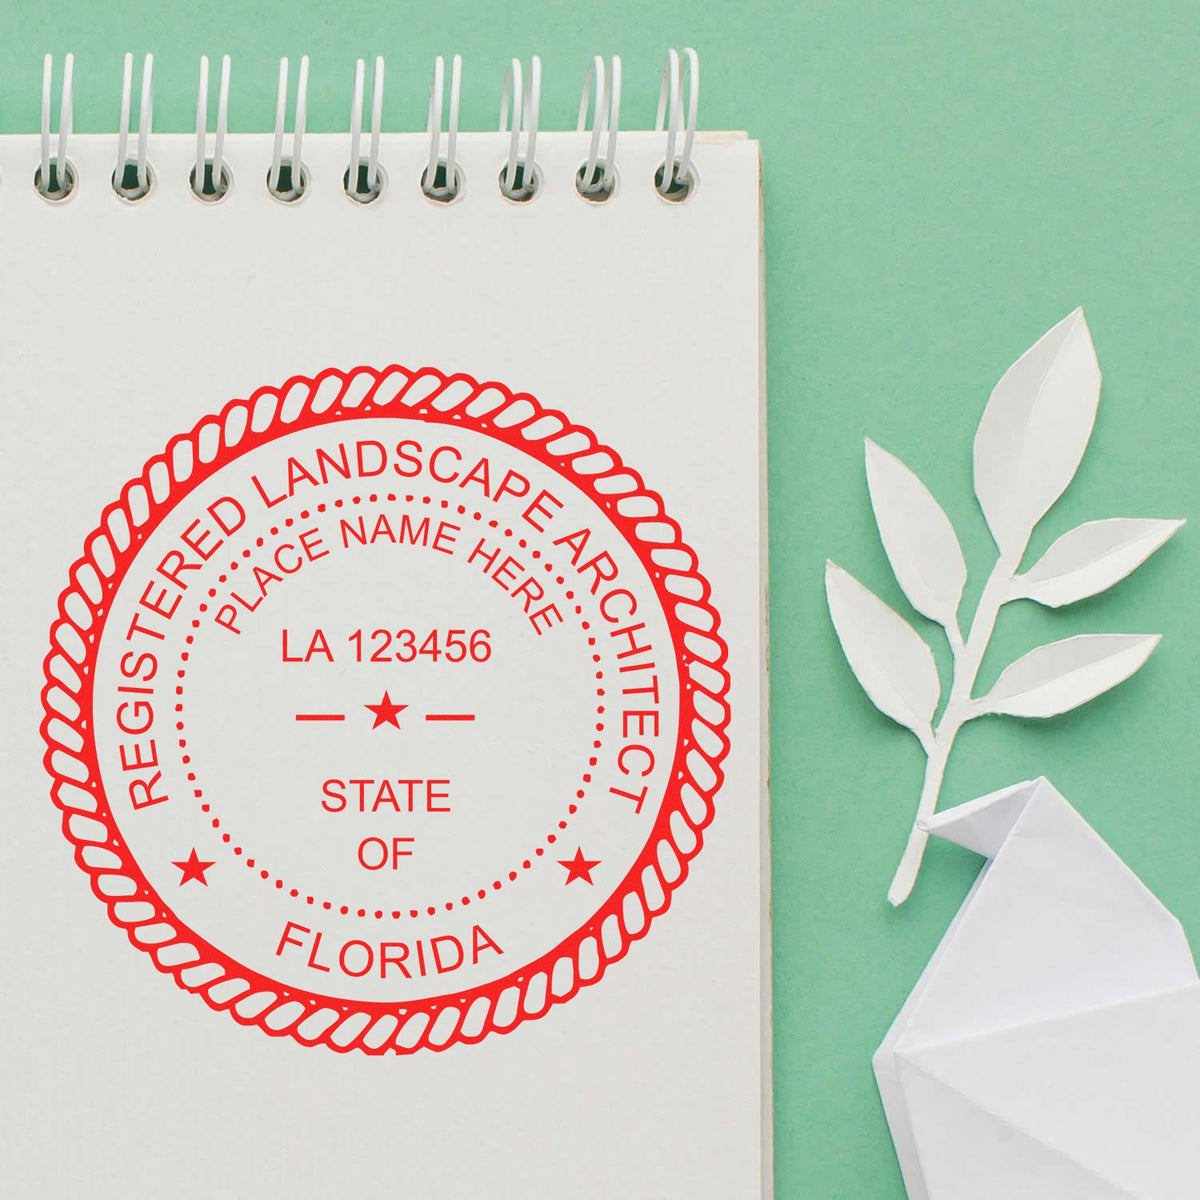 A stamped impression of the Self-Inking Florida Landscape Architect Stamp in this stylish lifestyle photo, setting the tone for a unique and personalized product.